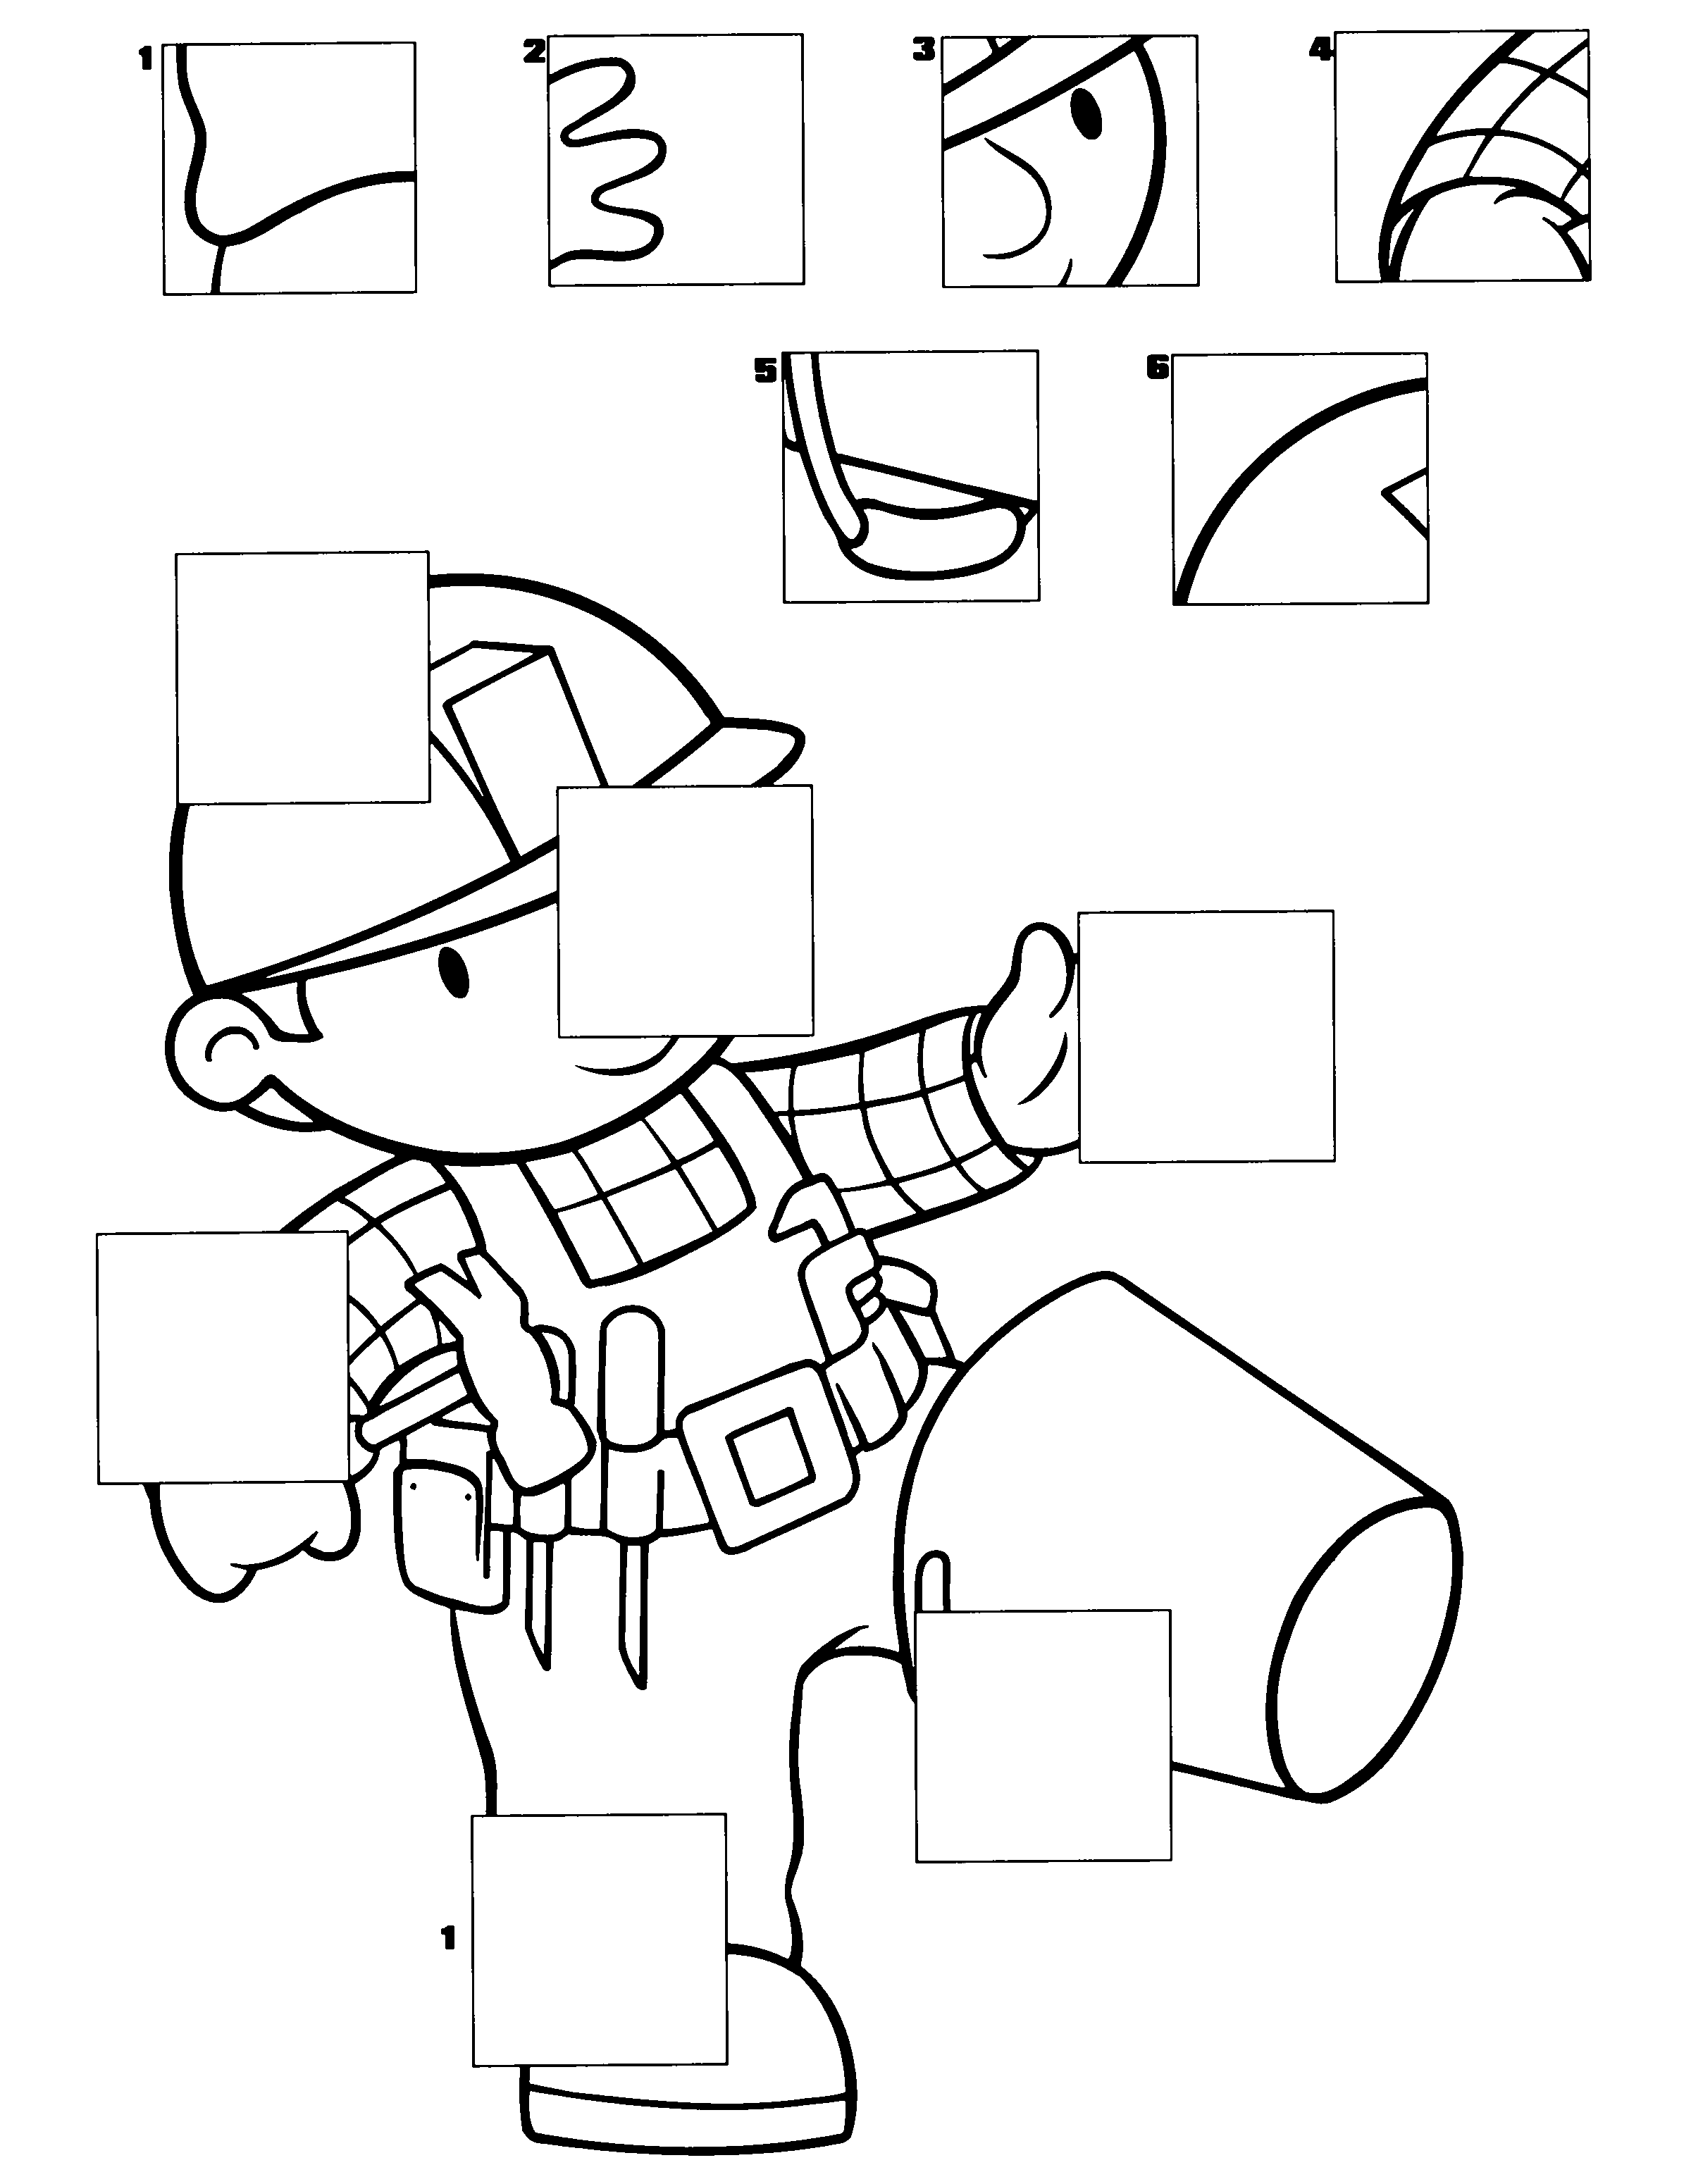 animated-coloring-pages-bob-the-builder-image-0007